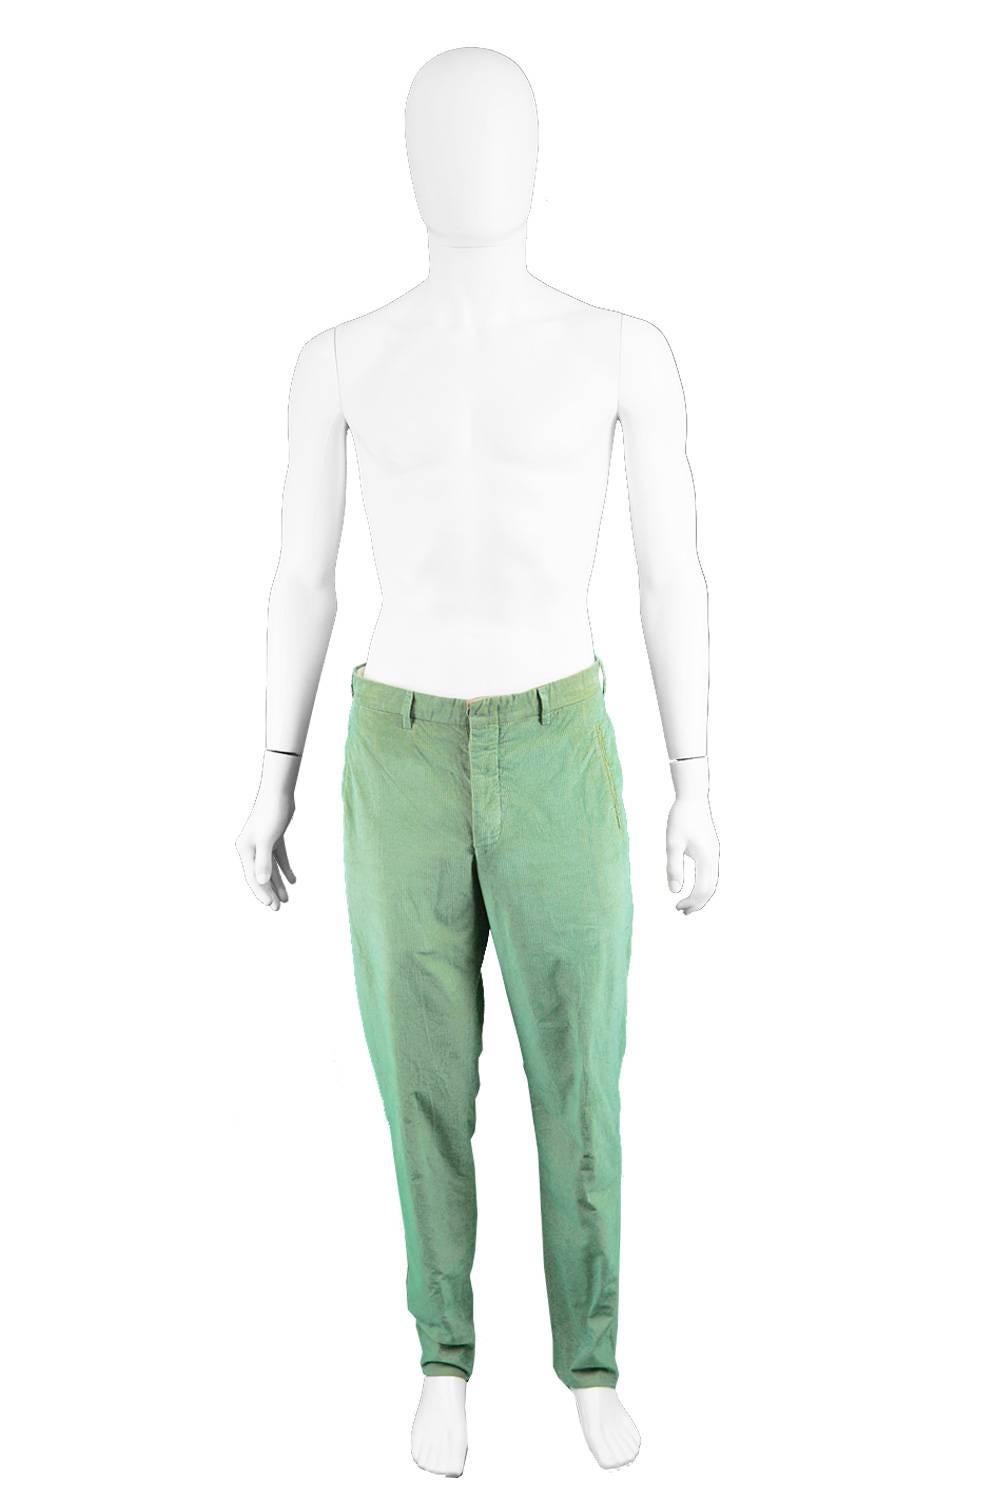 Romeo Gigli Men's Vintage 1990's Iridescent Green & Brown Tapered Leg Ribbed Pants

Size: Marked 48 which is roughly a men's Small. Please check measurements.
Waist - 32” / 81cm
Rise - 12” / 30cm
Inside Leg -33” / 84cm

Condition: Excellent Vintage